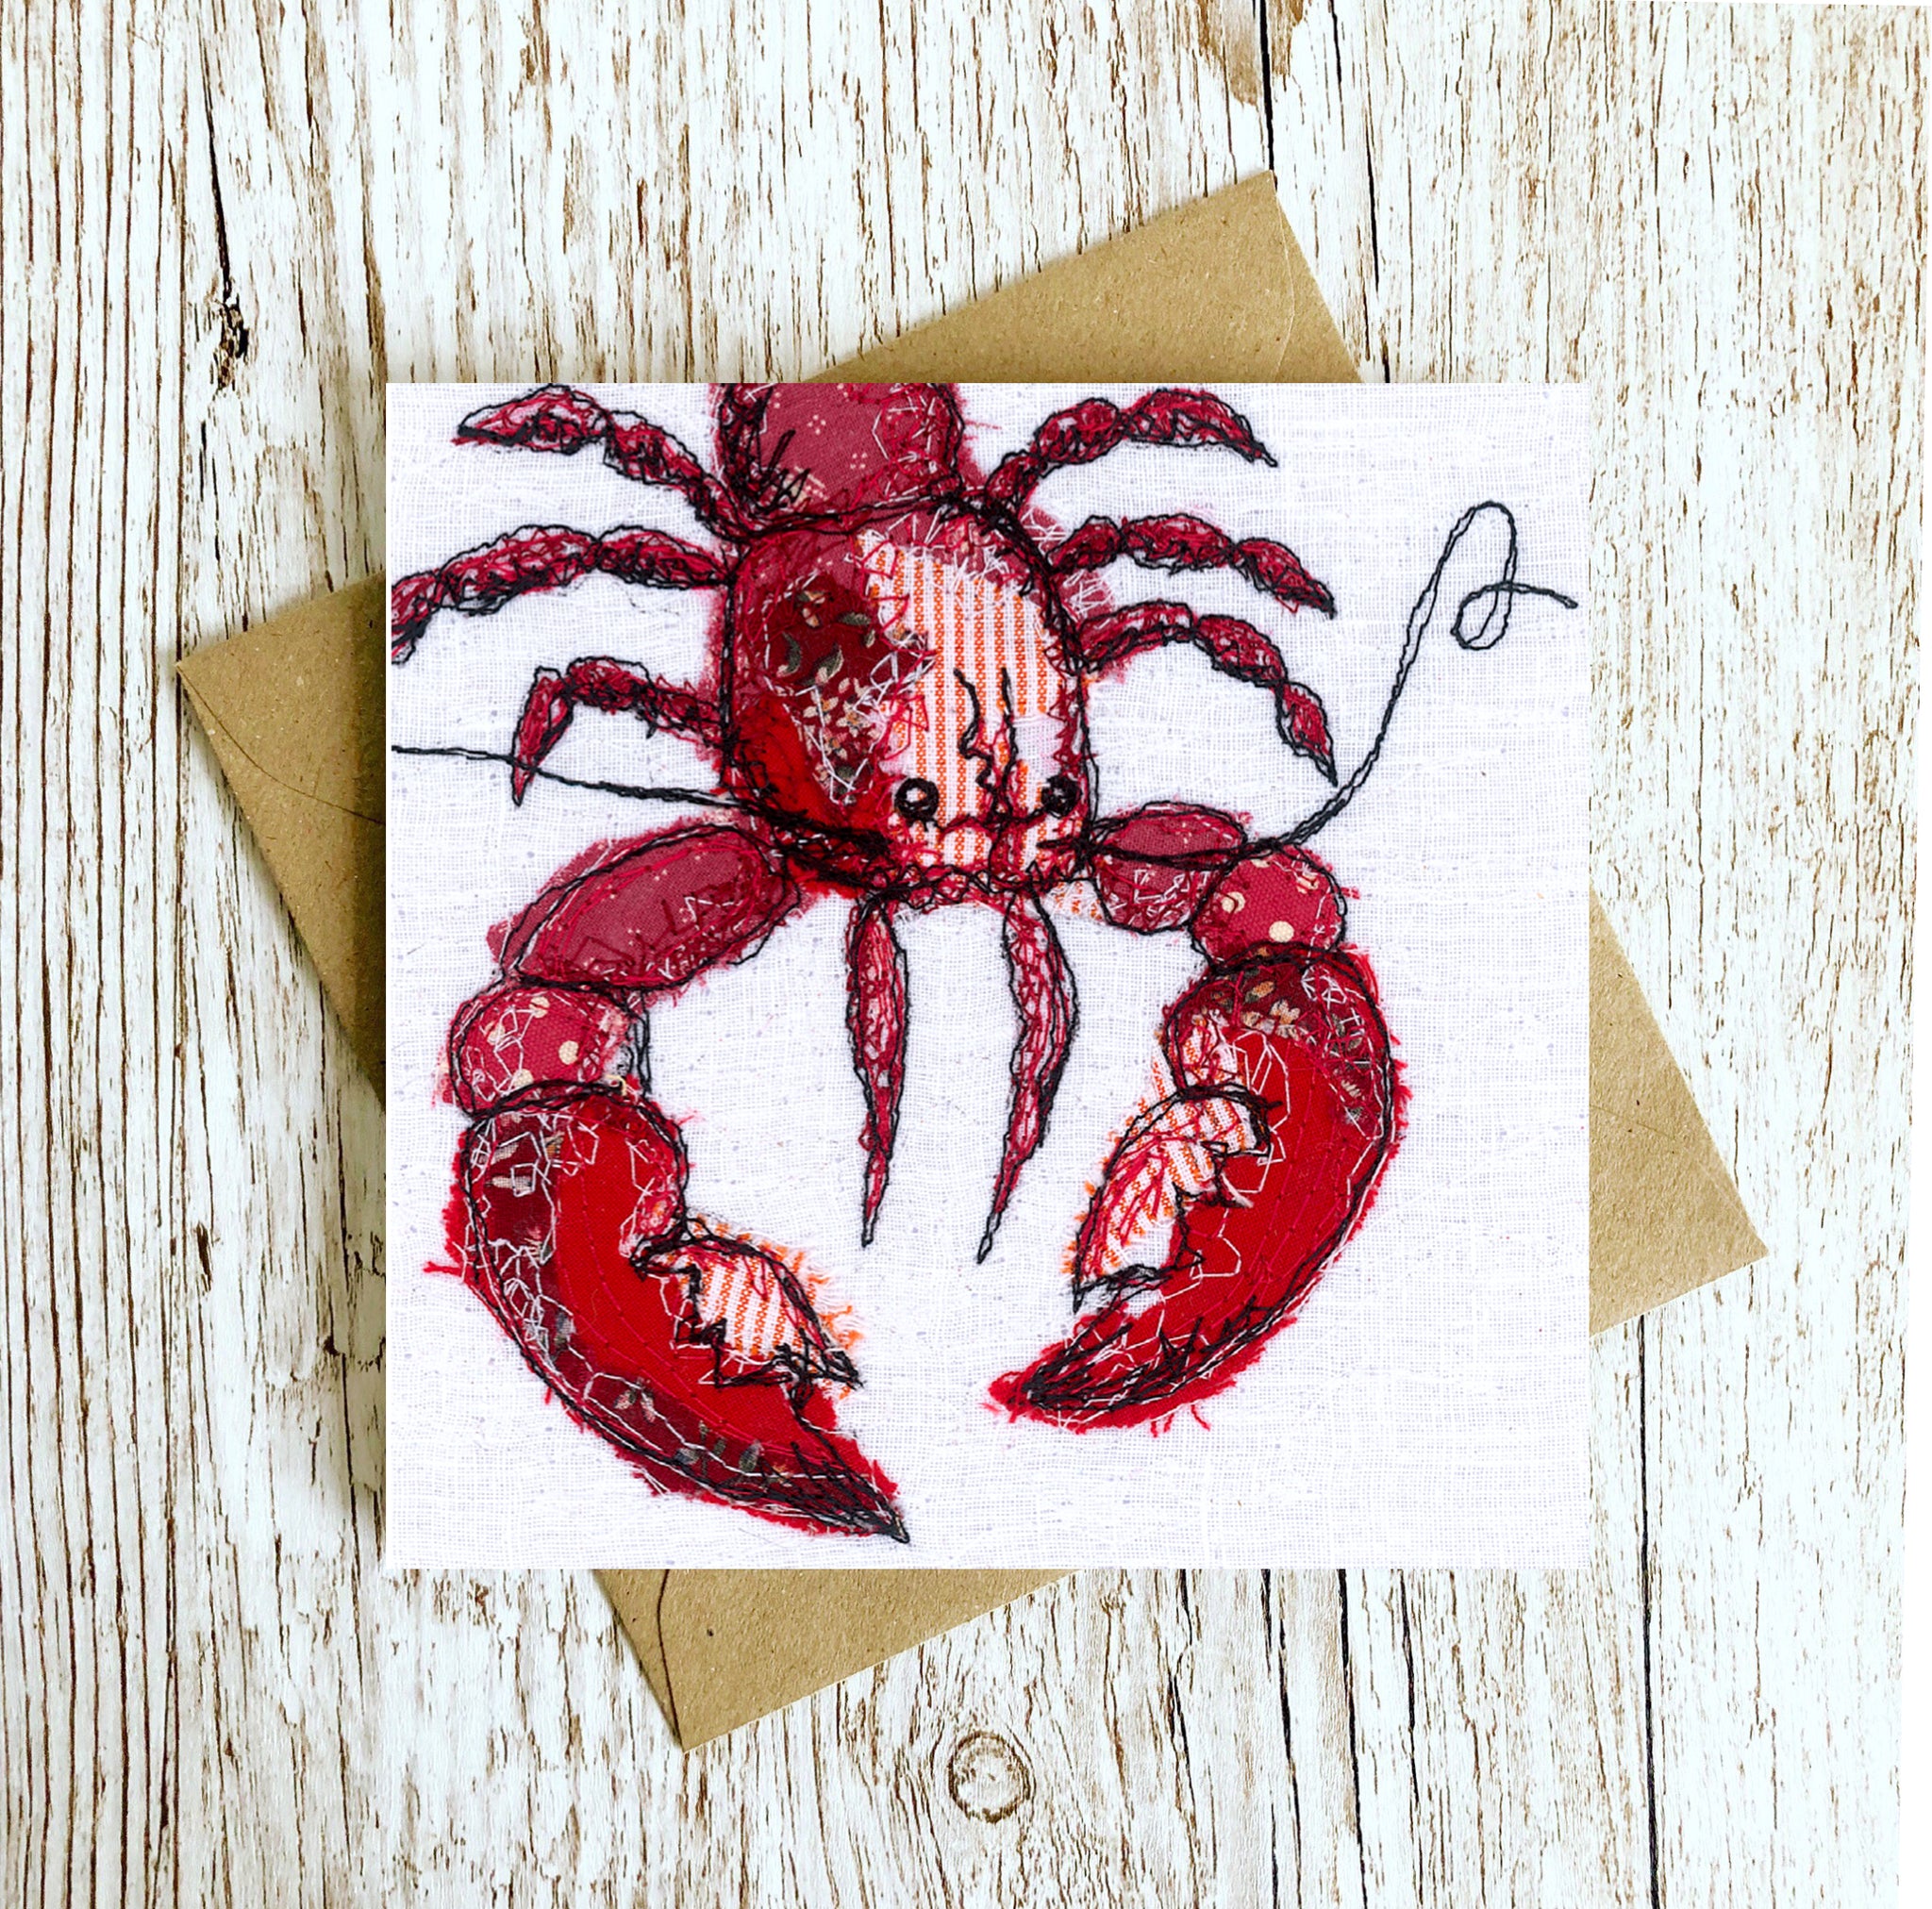 embroidery art